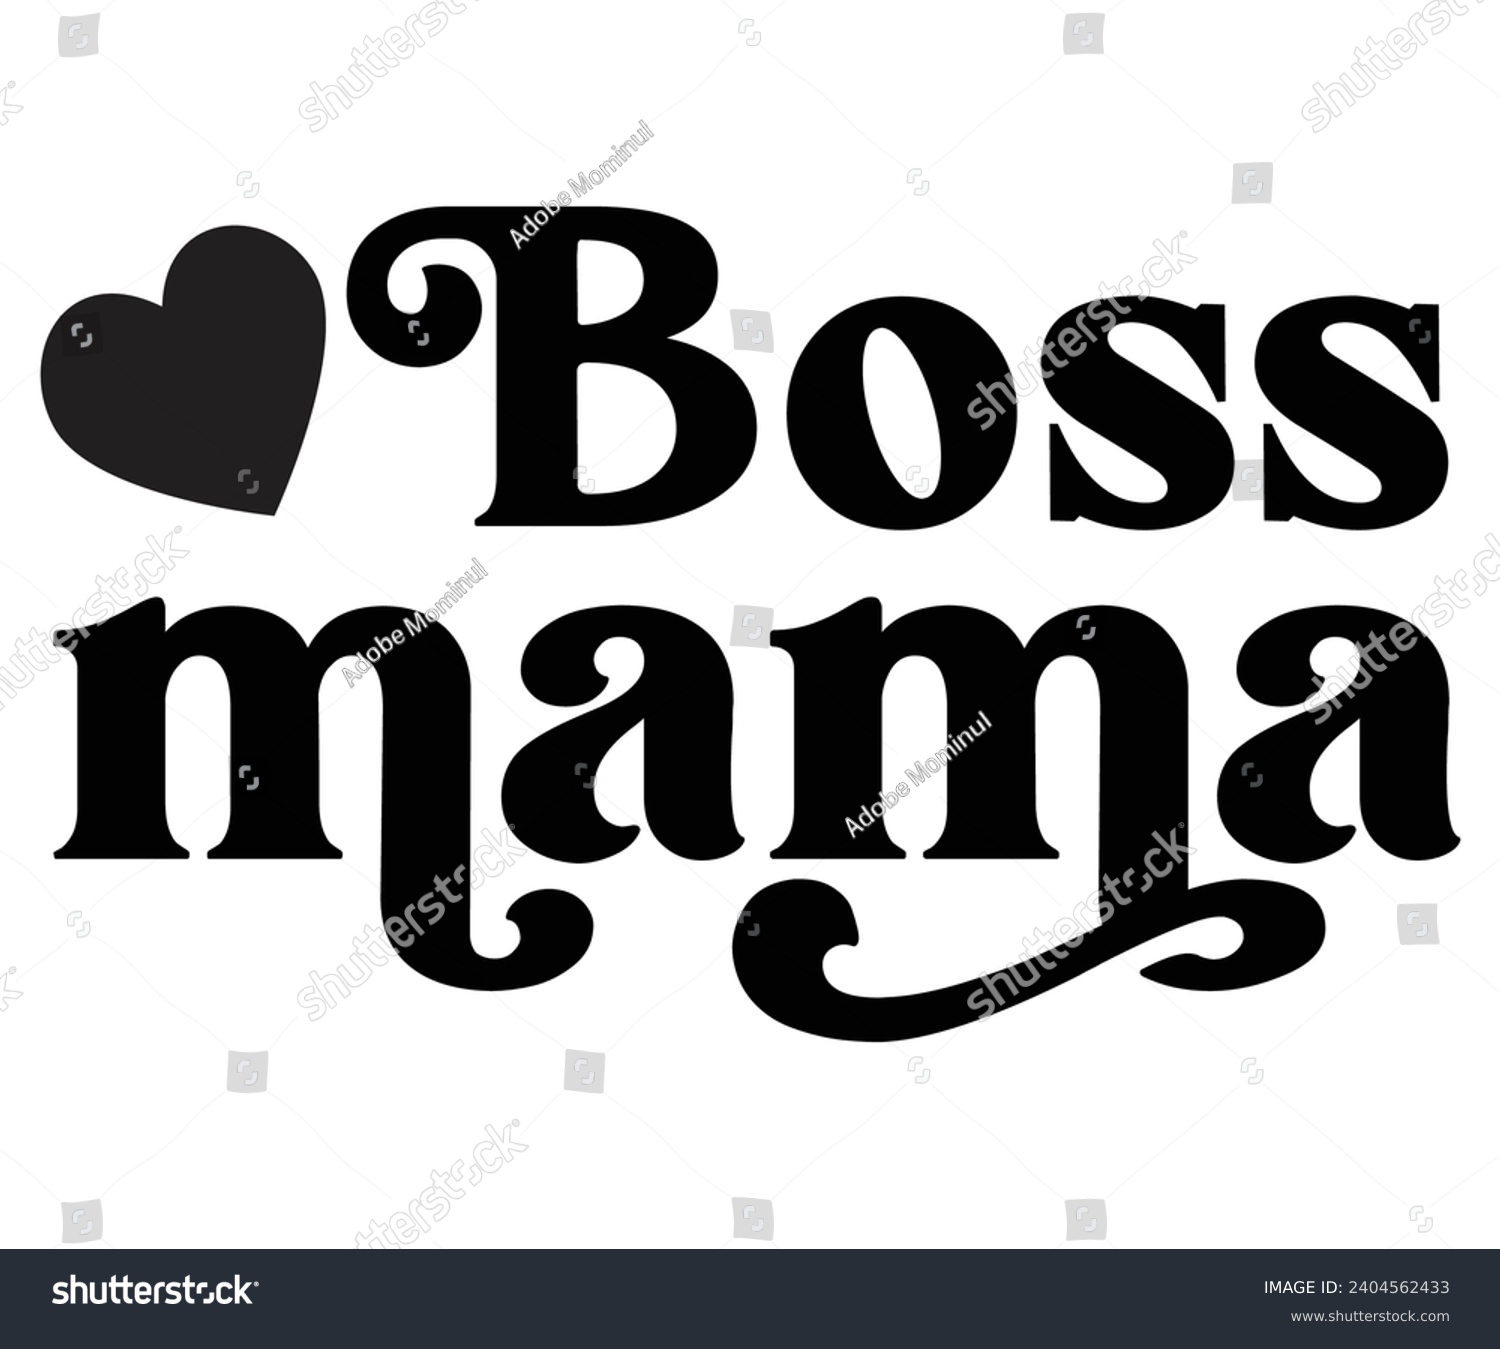 SVG of Boss Mama Svg,Happy Boss Day svg,Boss Saying Quotes,Boss Day T-shirt,Gift for Boss,Mother Day,Happy Bosses Day t-shirt,Girl Boss Shirt,Motivational Boss,Cut File,Circut And Silhouette,Commercial Use svg